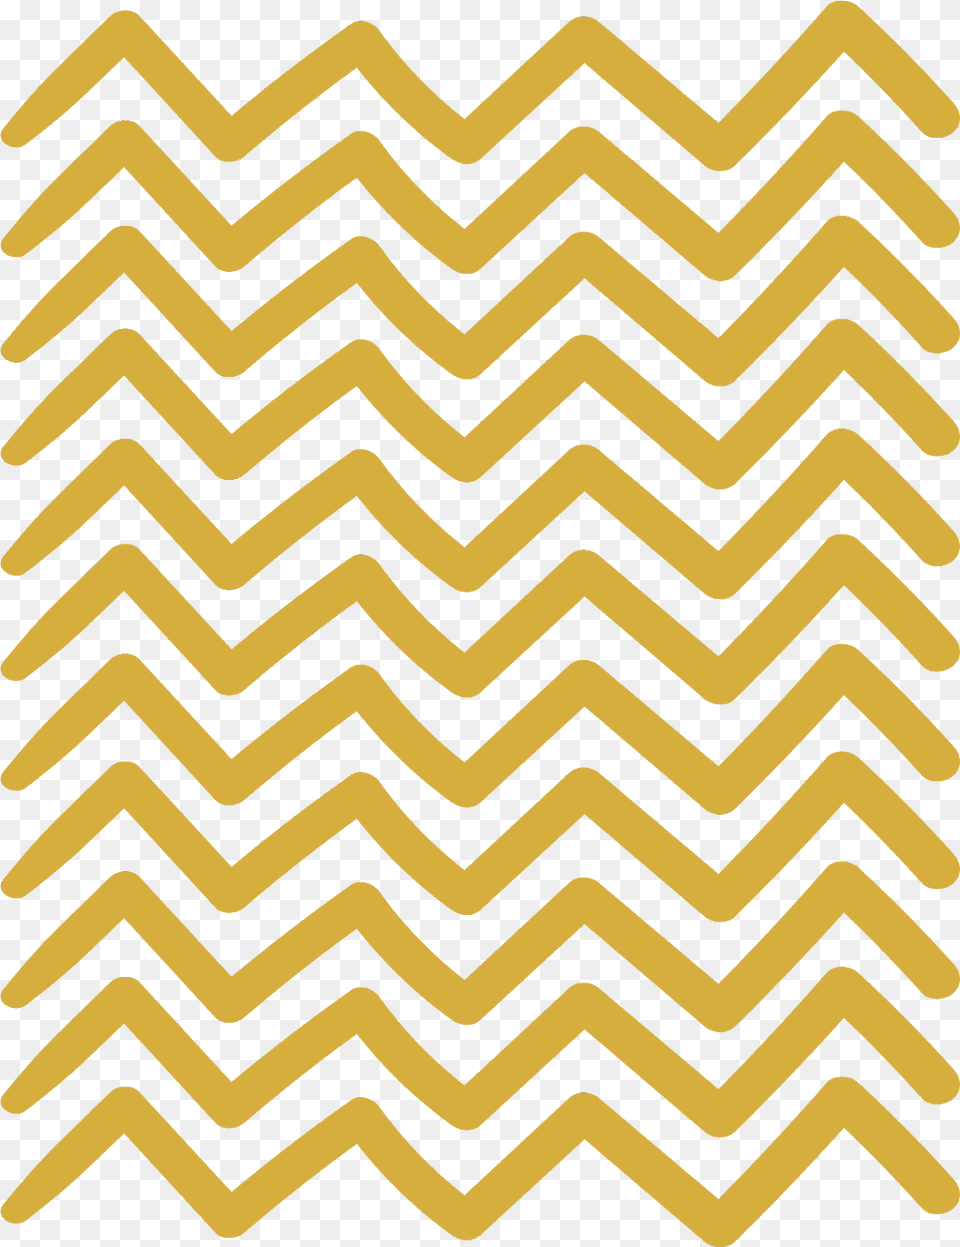 Gold Chevron Pattern Background Decor Decorations The Pyramid Scheme, Home Decor Free Png Download